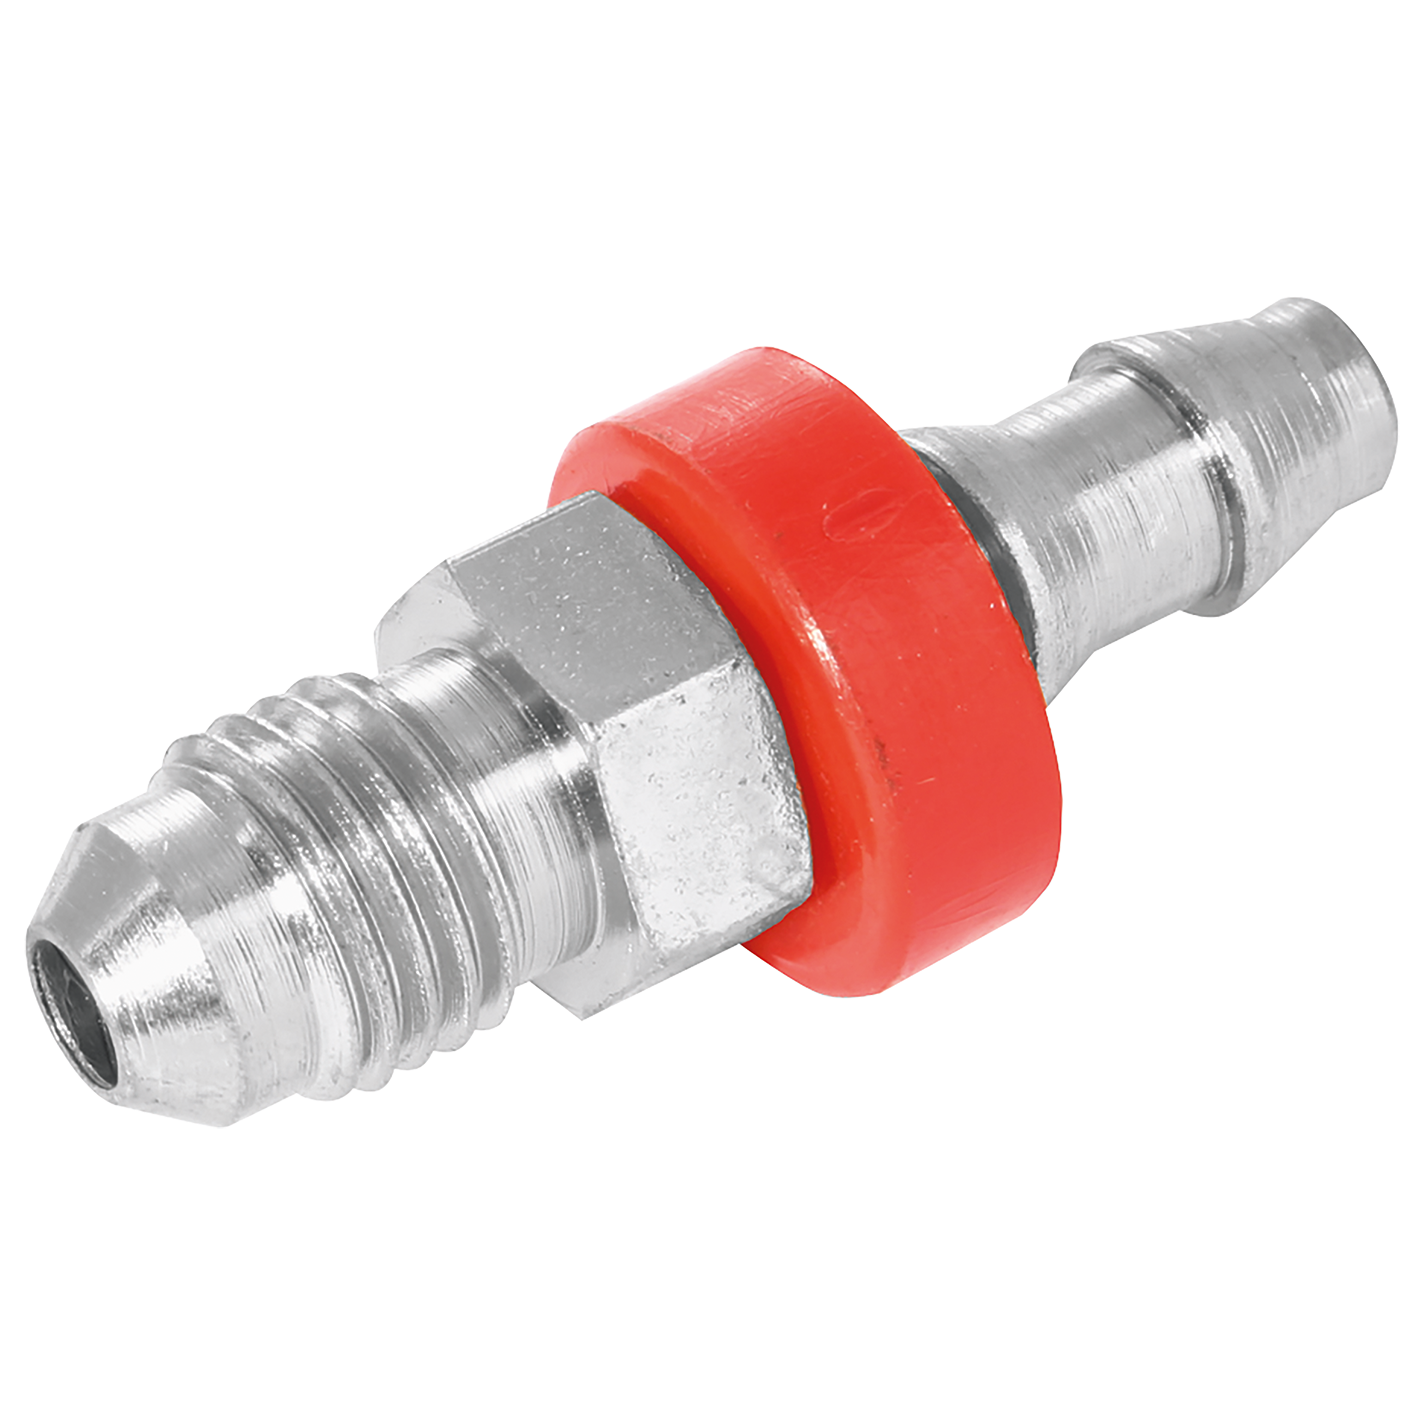 7/16" JIC M 37 CONE X1/4" PUSH-IN STRAIGHTGHT